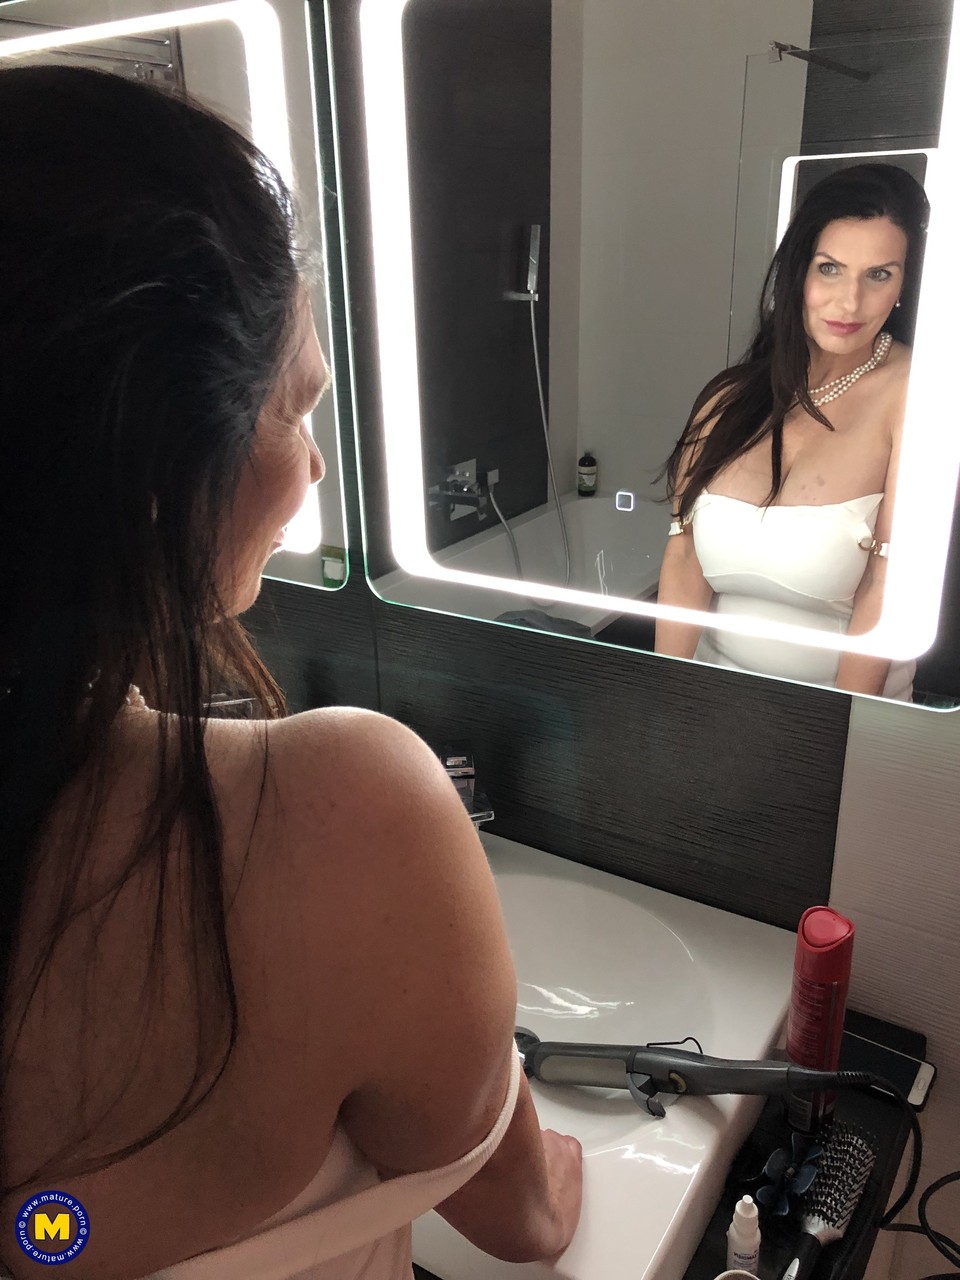 Big Breasted Mom Josephine James Teases With Her Amazing Cleavage